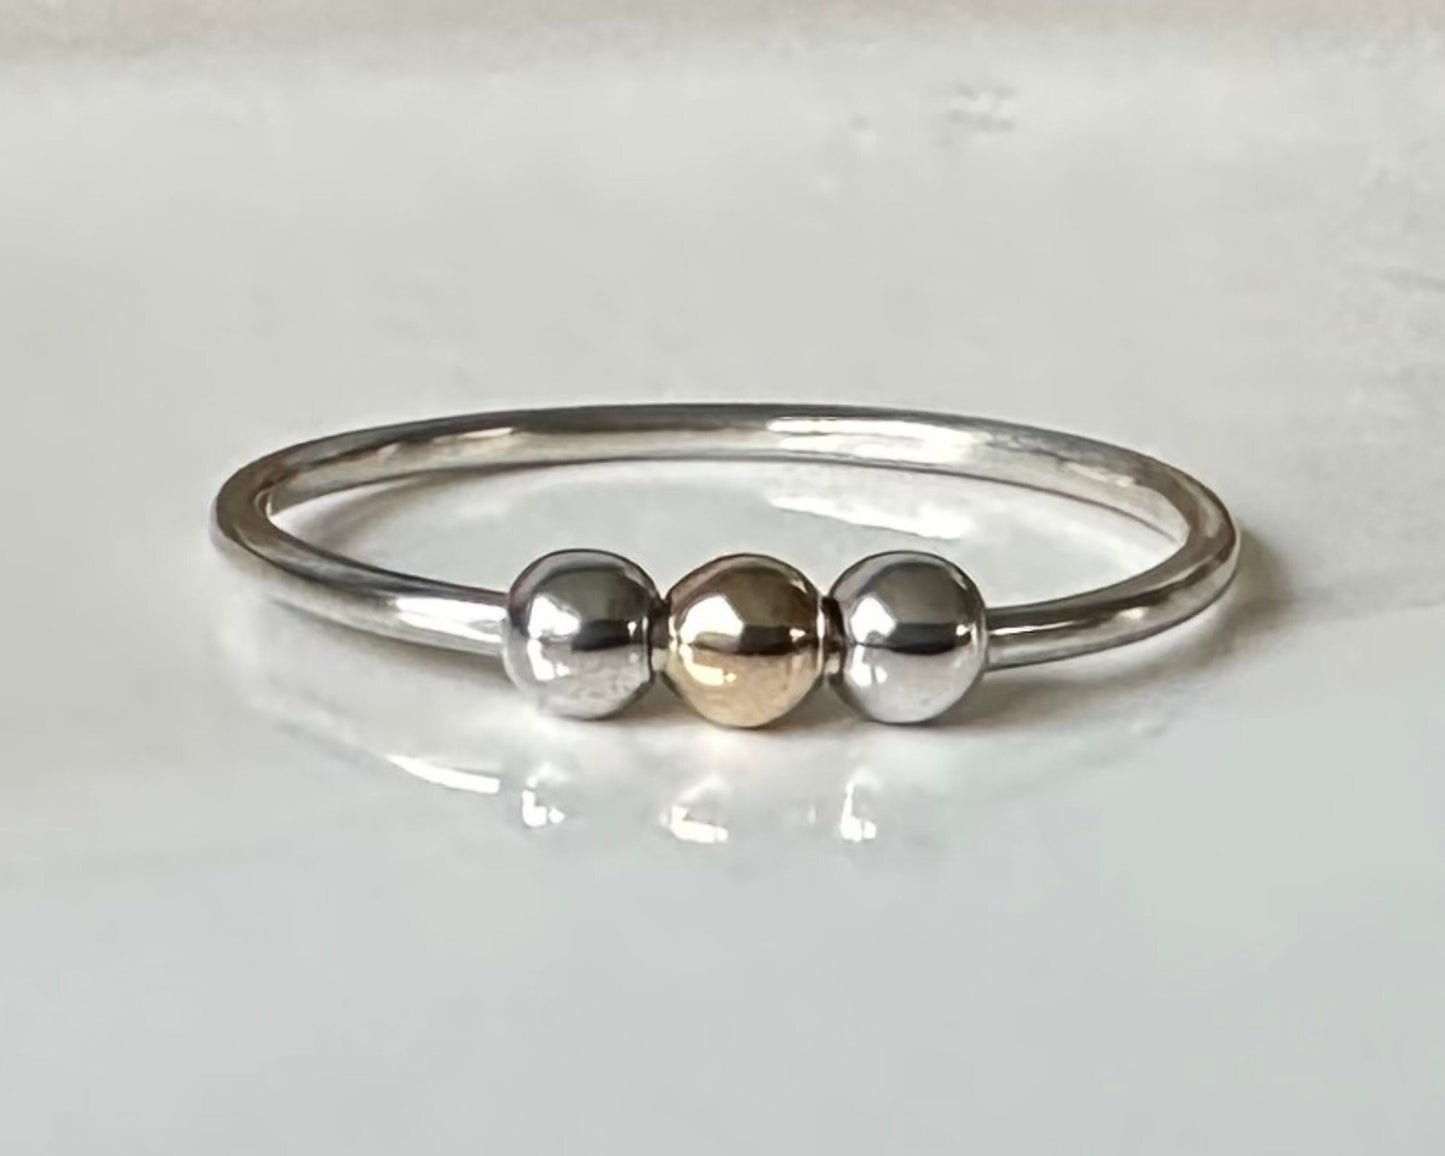 Fidget Ring Handmade from 925 Sterling Silver and 9ct Gold and Silver Beads, Gold and Silver Stackable Ring Band, Anxiety Ring, Spinner Ring